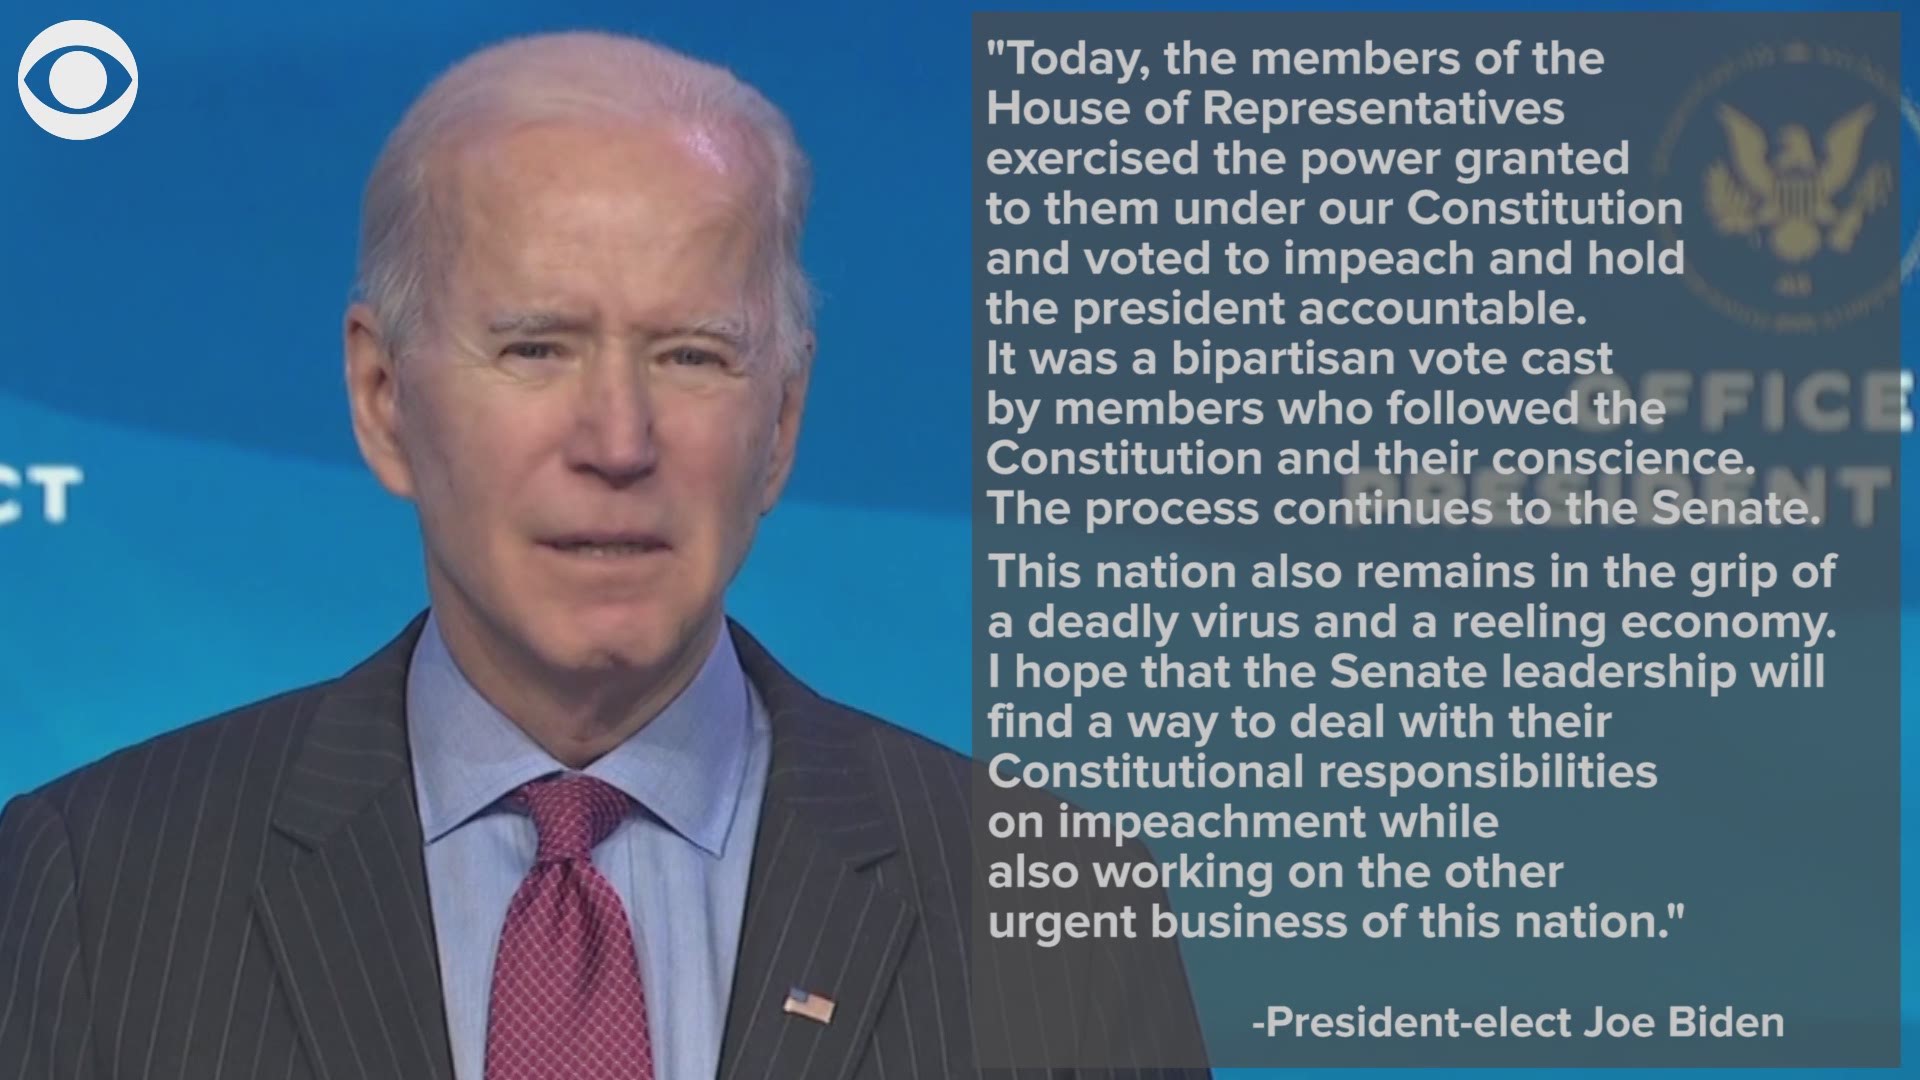 President-elect Joe Biden says he hopes the Senate will find a way to balance its duties when it comes to the impeachment of President Trump